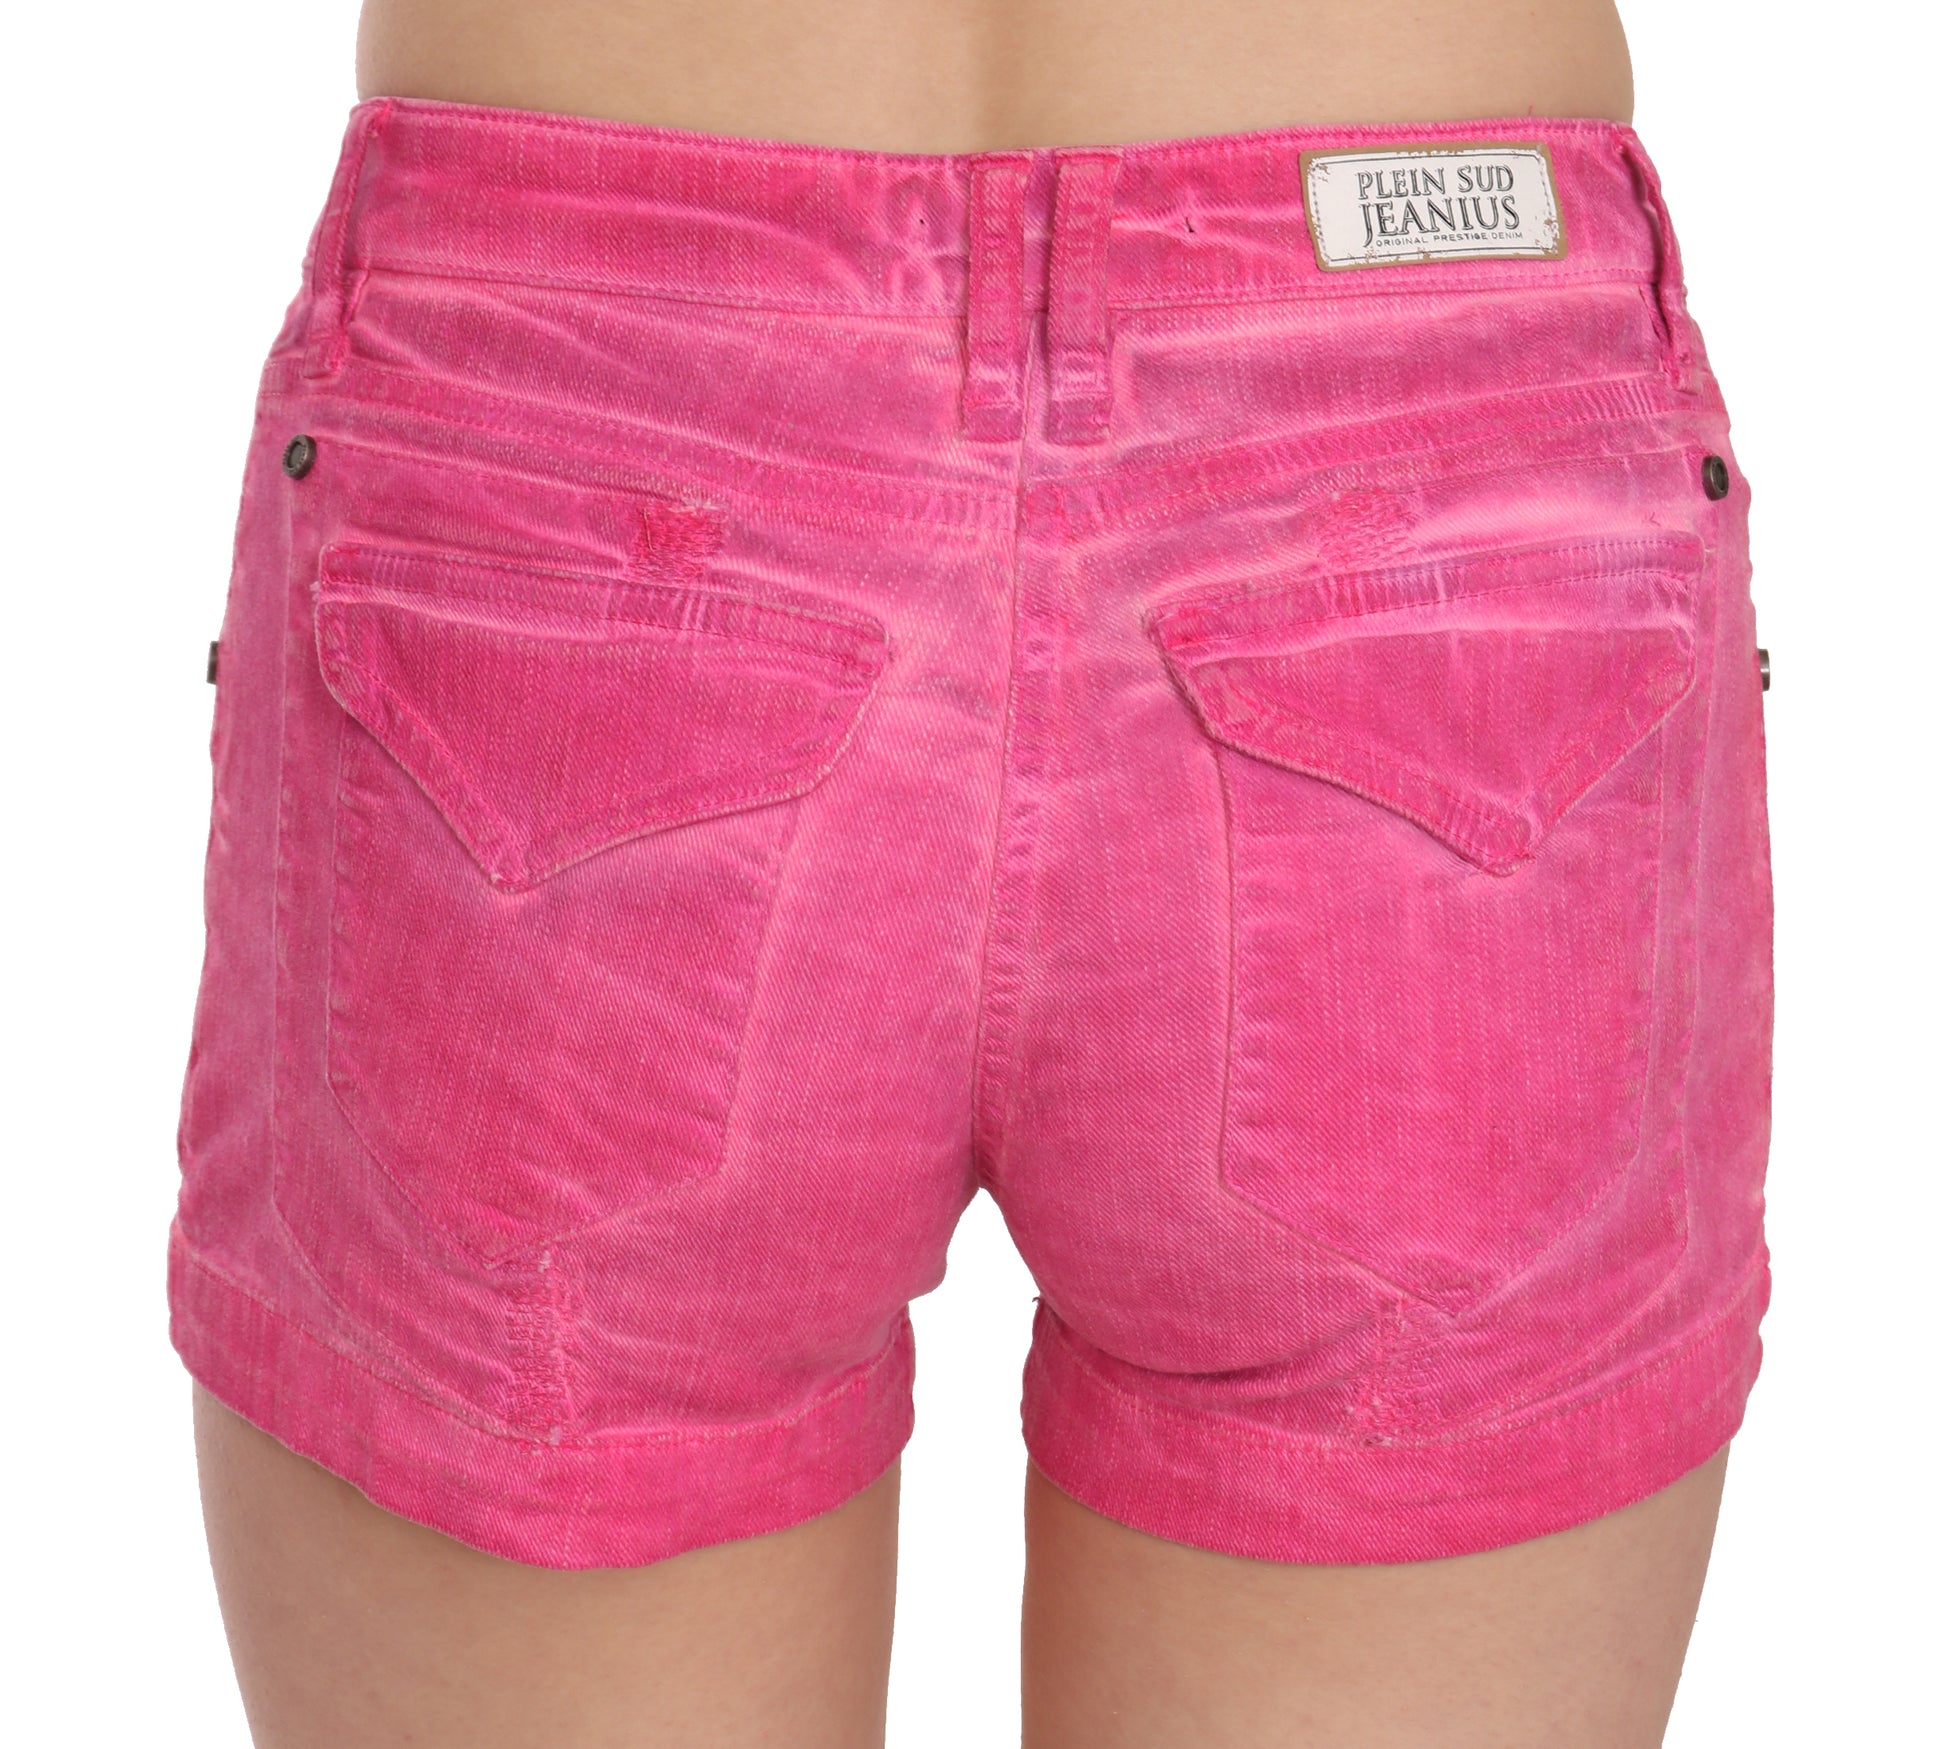 Pink Mid Waist Cotton Denim Mini Shorts designed by PLEIN SUD available from Moon Behind The Hill's Women's Clothing range